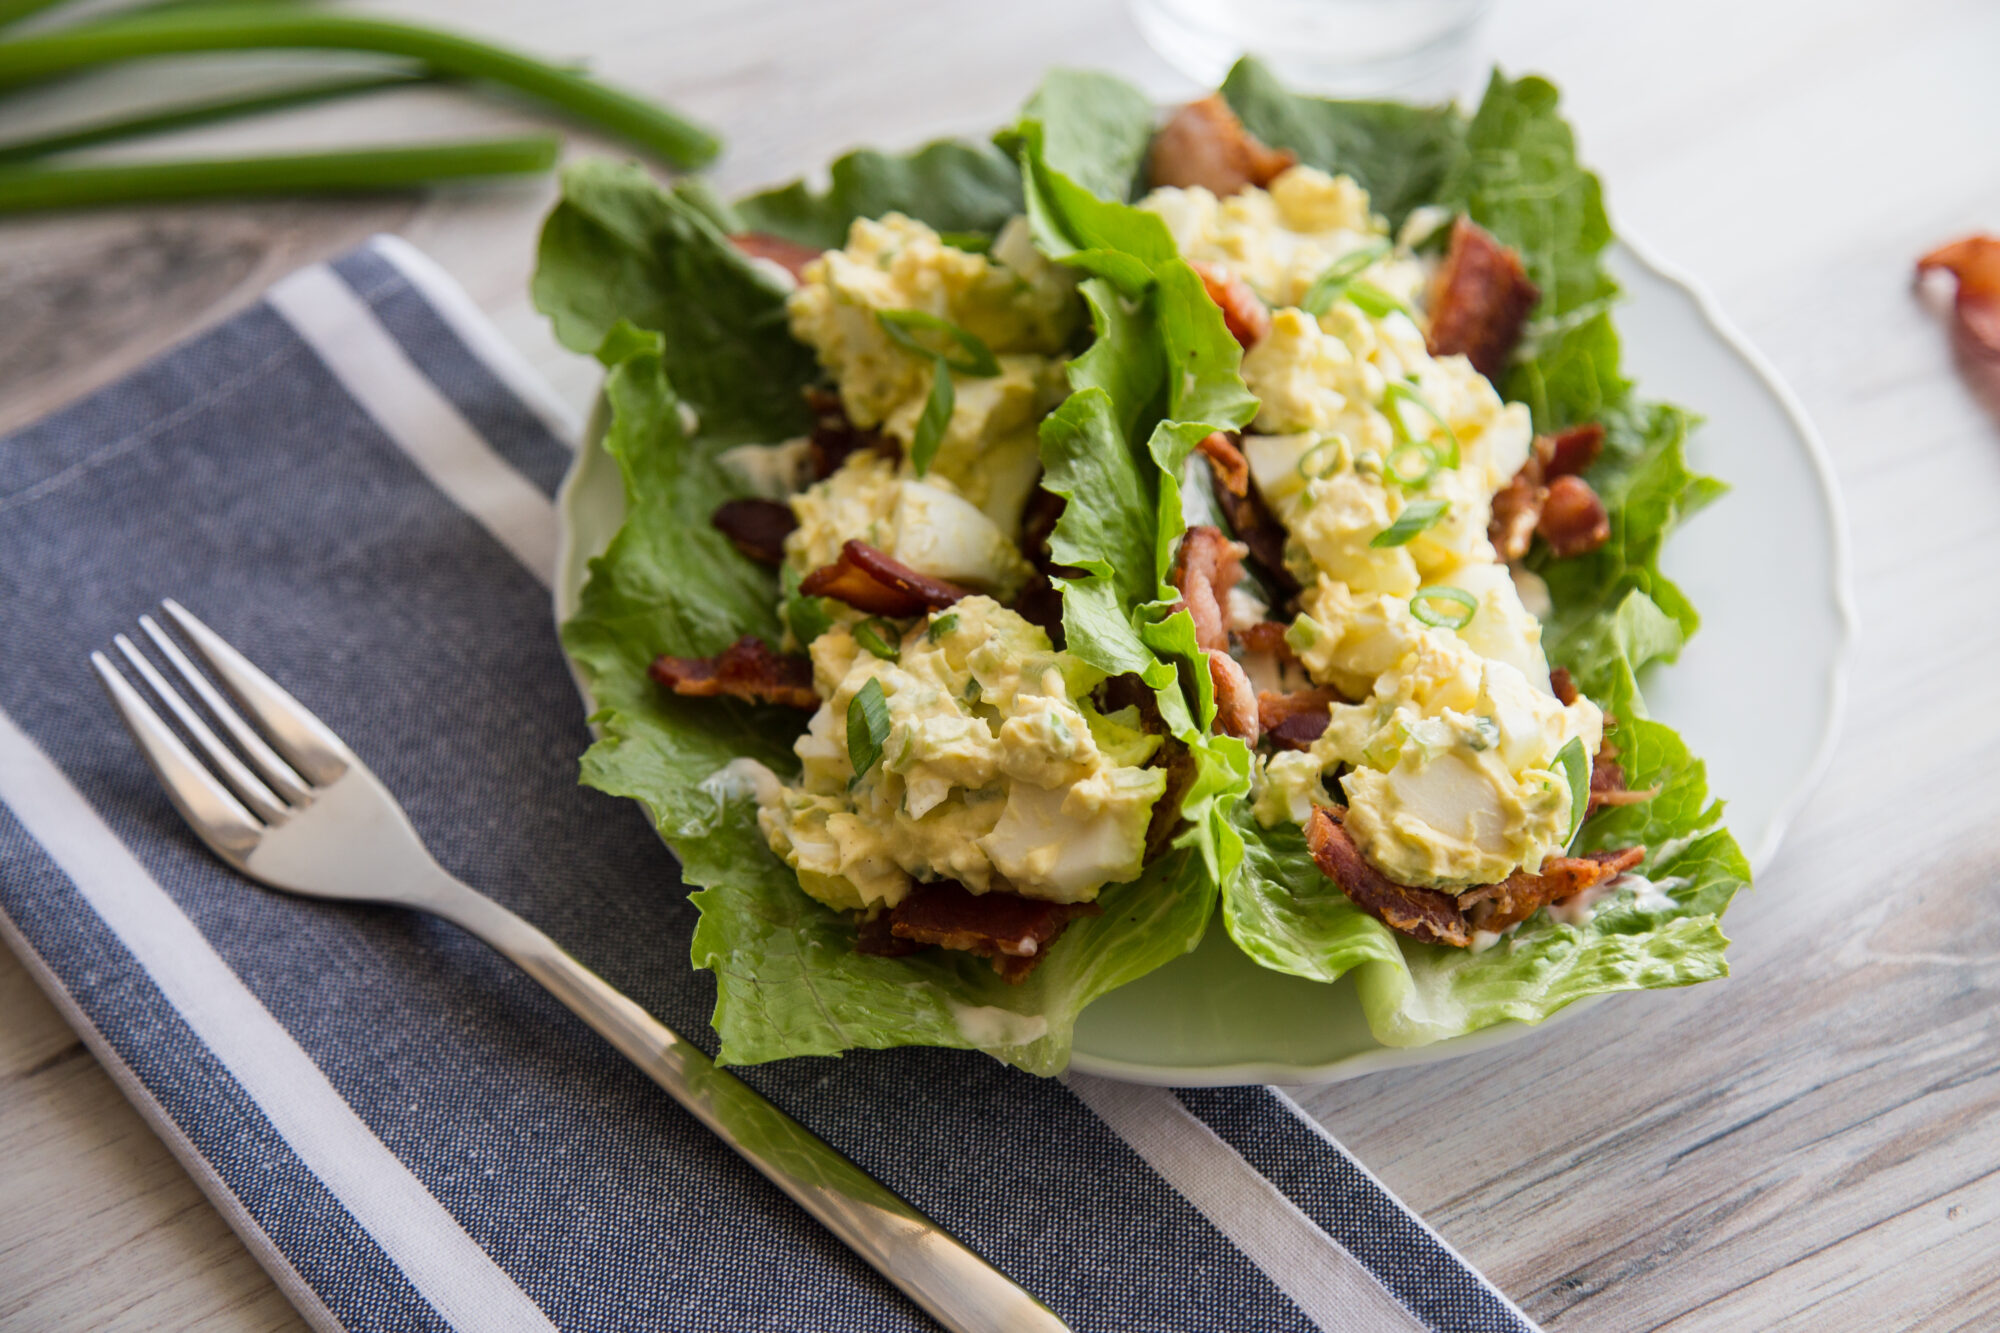 Bacon, Lettuce and Egg Salad Wraps